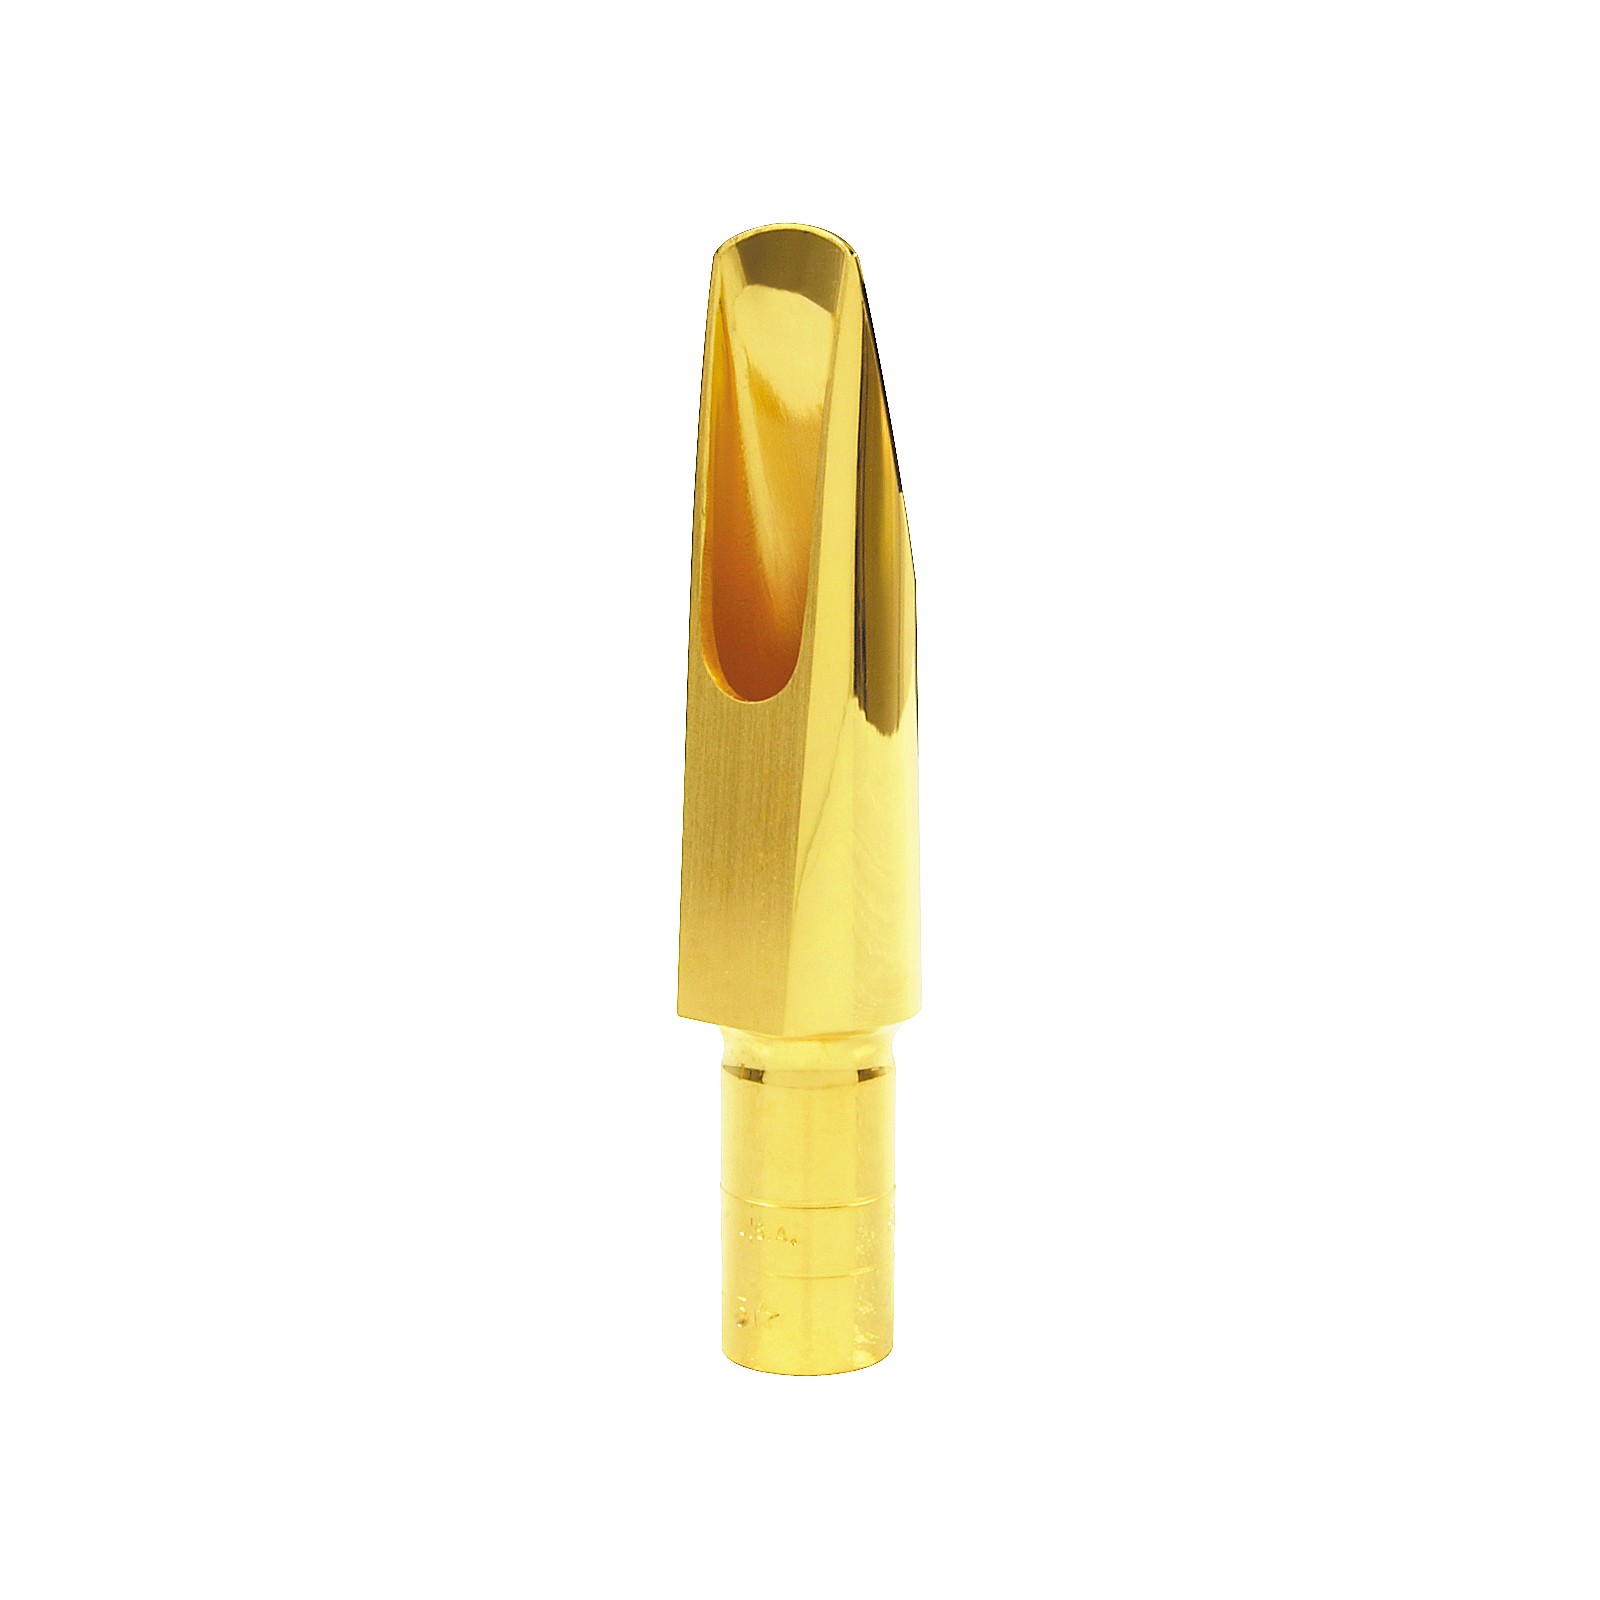 5 Size Ottolink OLRBS5 Rubber Baritone Saxophone Mouthpiece 